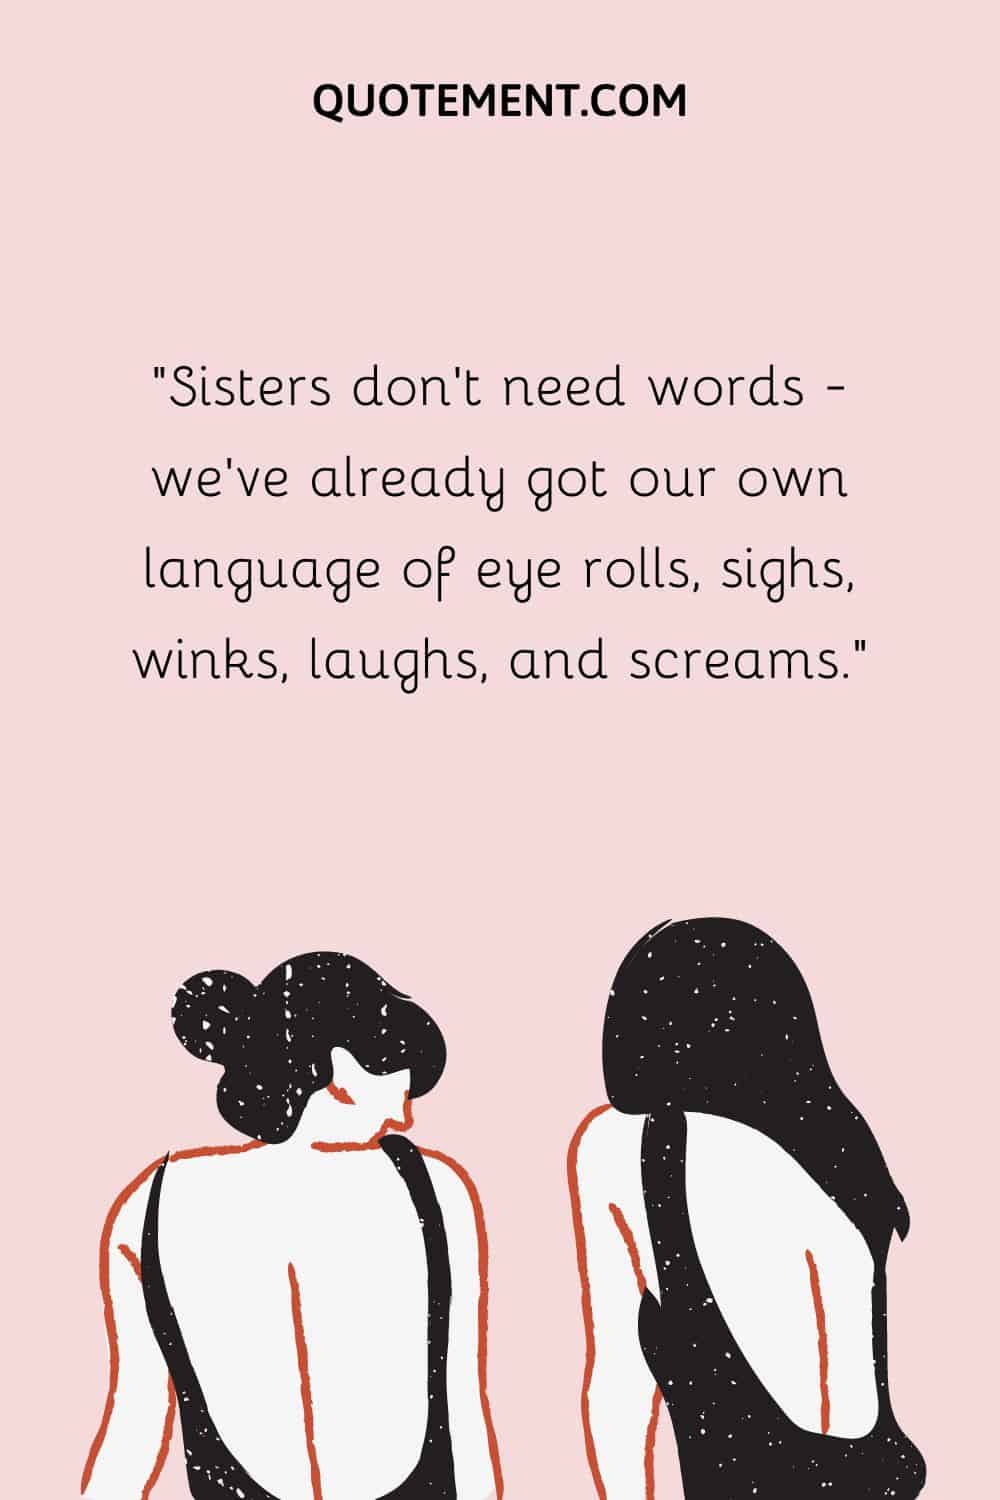 Sisters don’t need words — we’ve already got our own language of eye rolls, sighs, winks, laughs, and screams